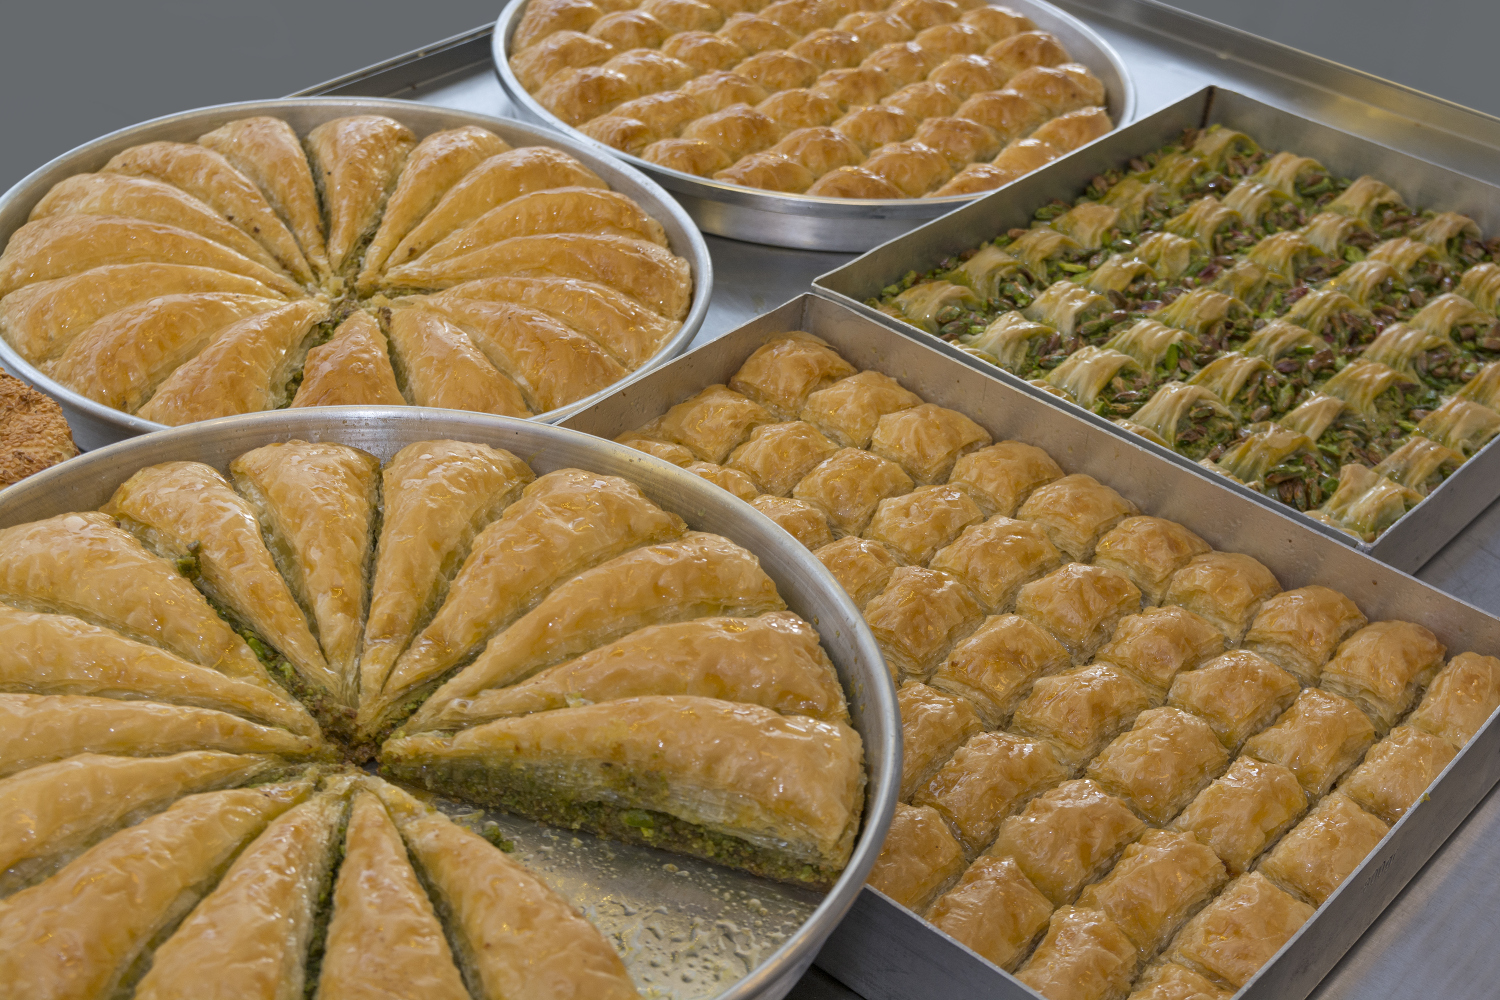 Butter, sugar, filo pastry and nuts: this is baklava, Turkey's best-loved dessert. Image by Ayhan Altun / E+ / Getty